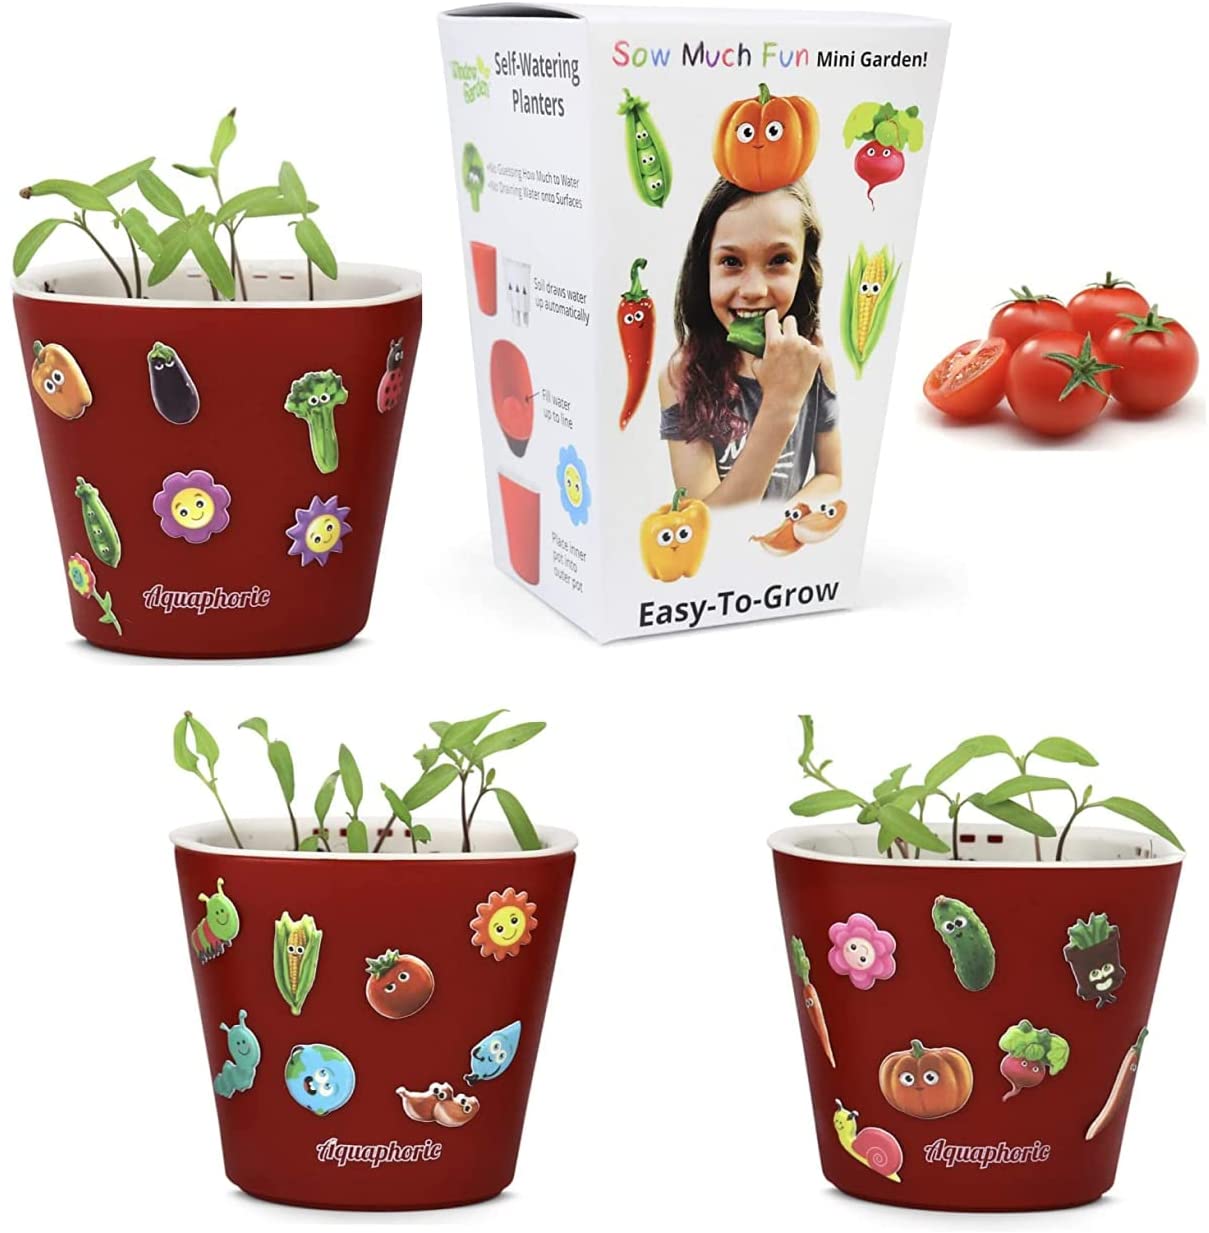 Window Garden Sow Much Fun Seed Starting, Vegetable Planting and Growing Kit for Kids, 3